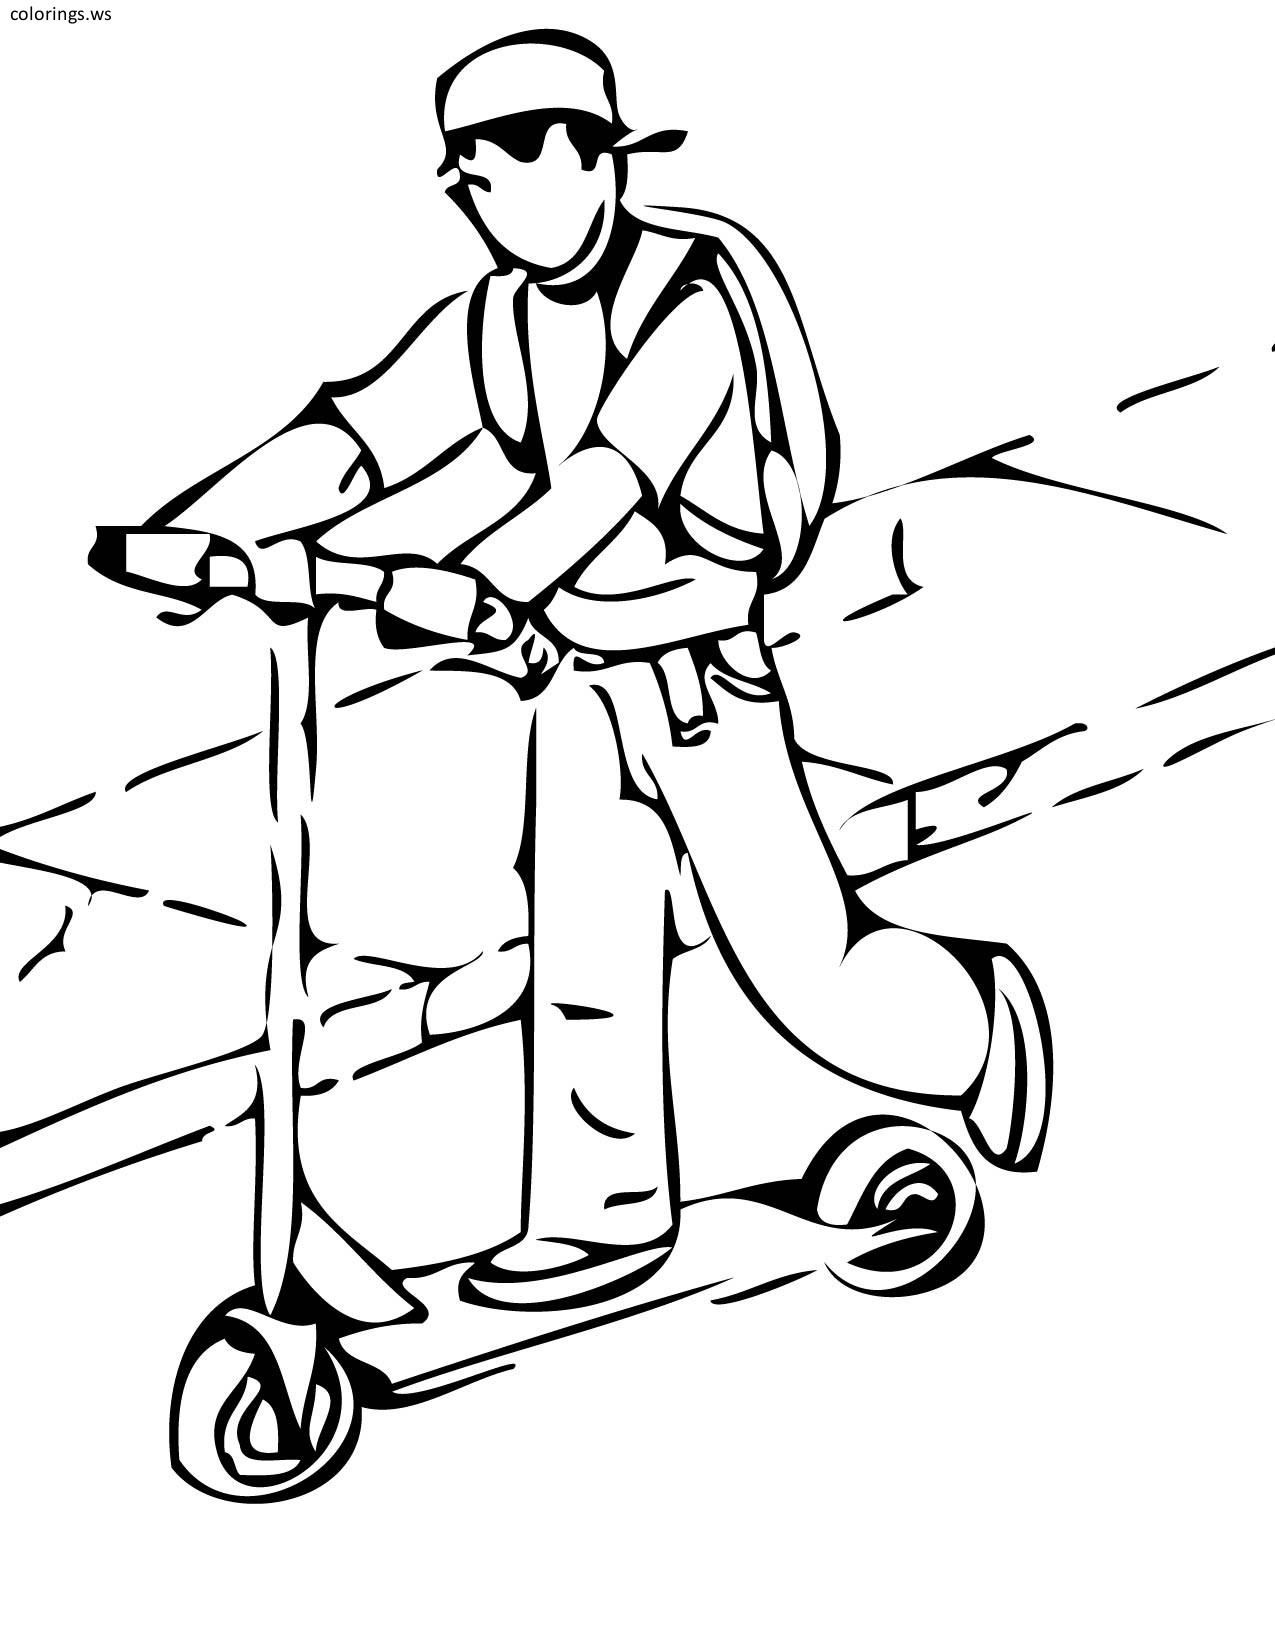 Scooter Coloring Pages - Coloring Home